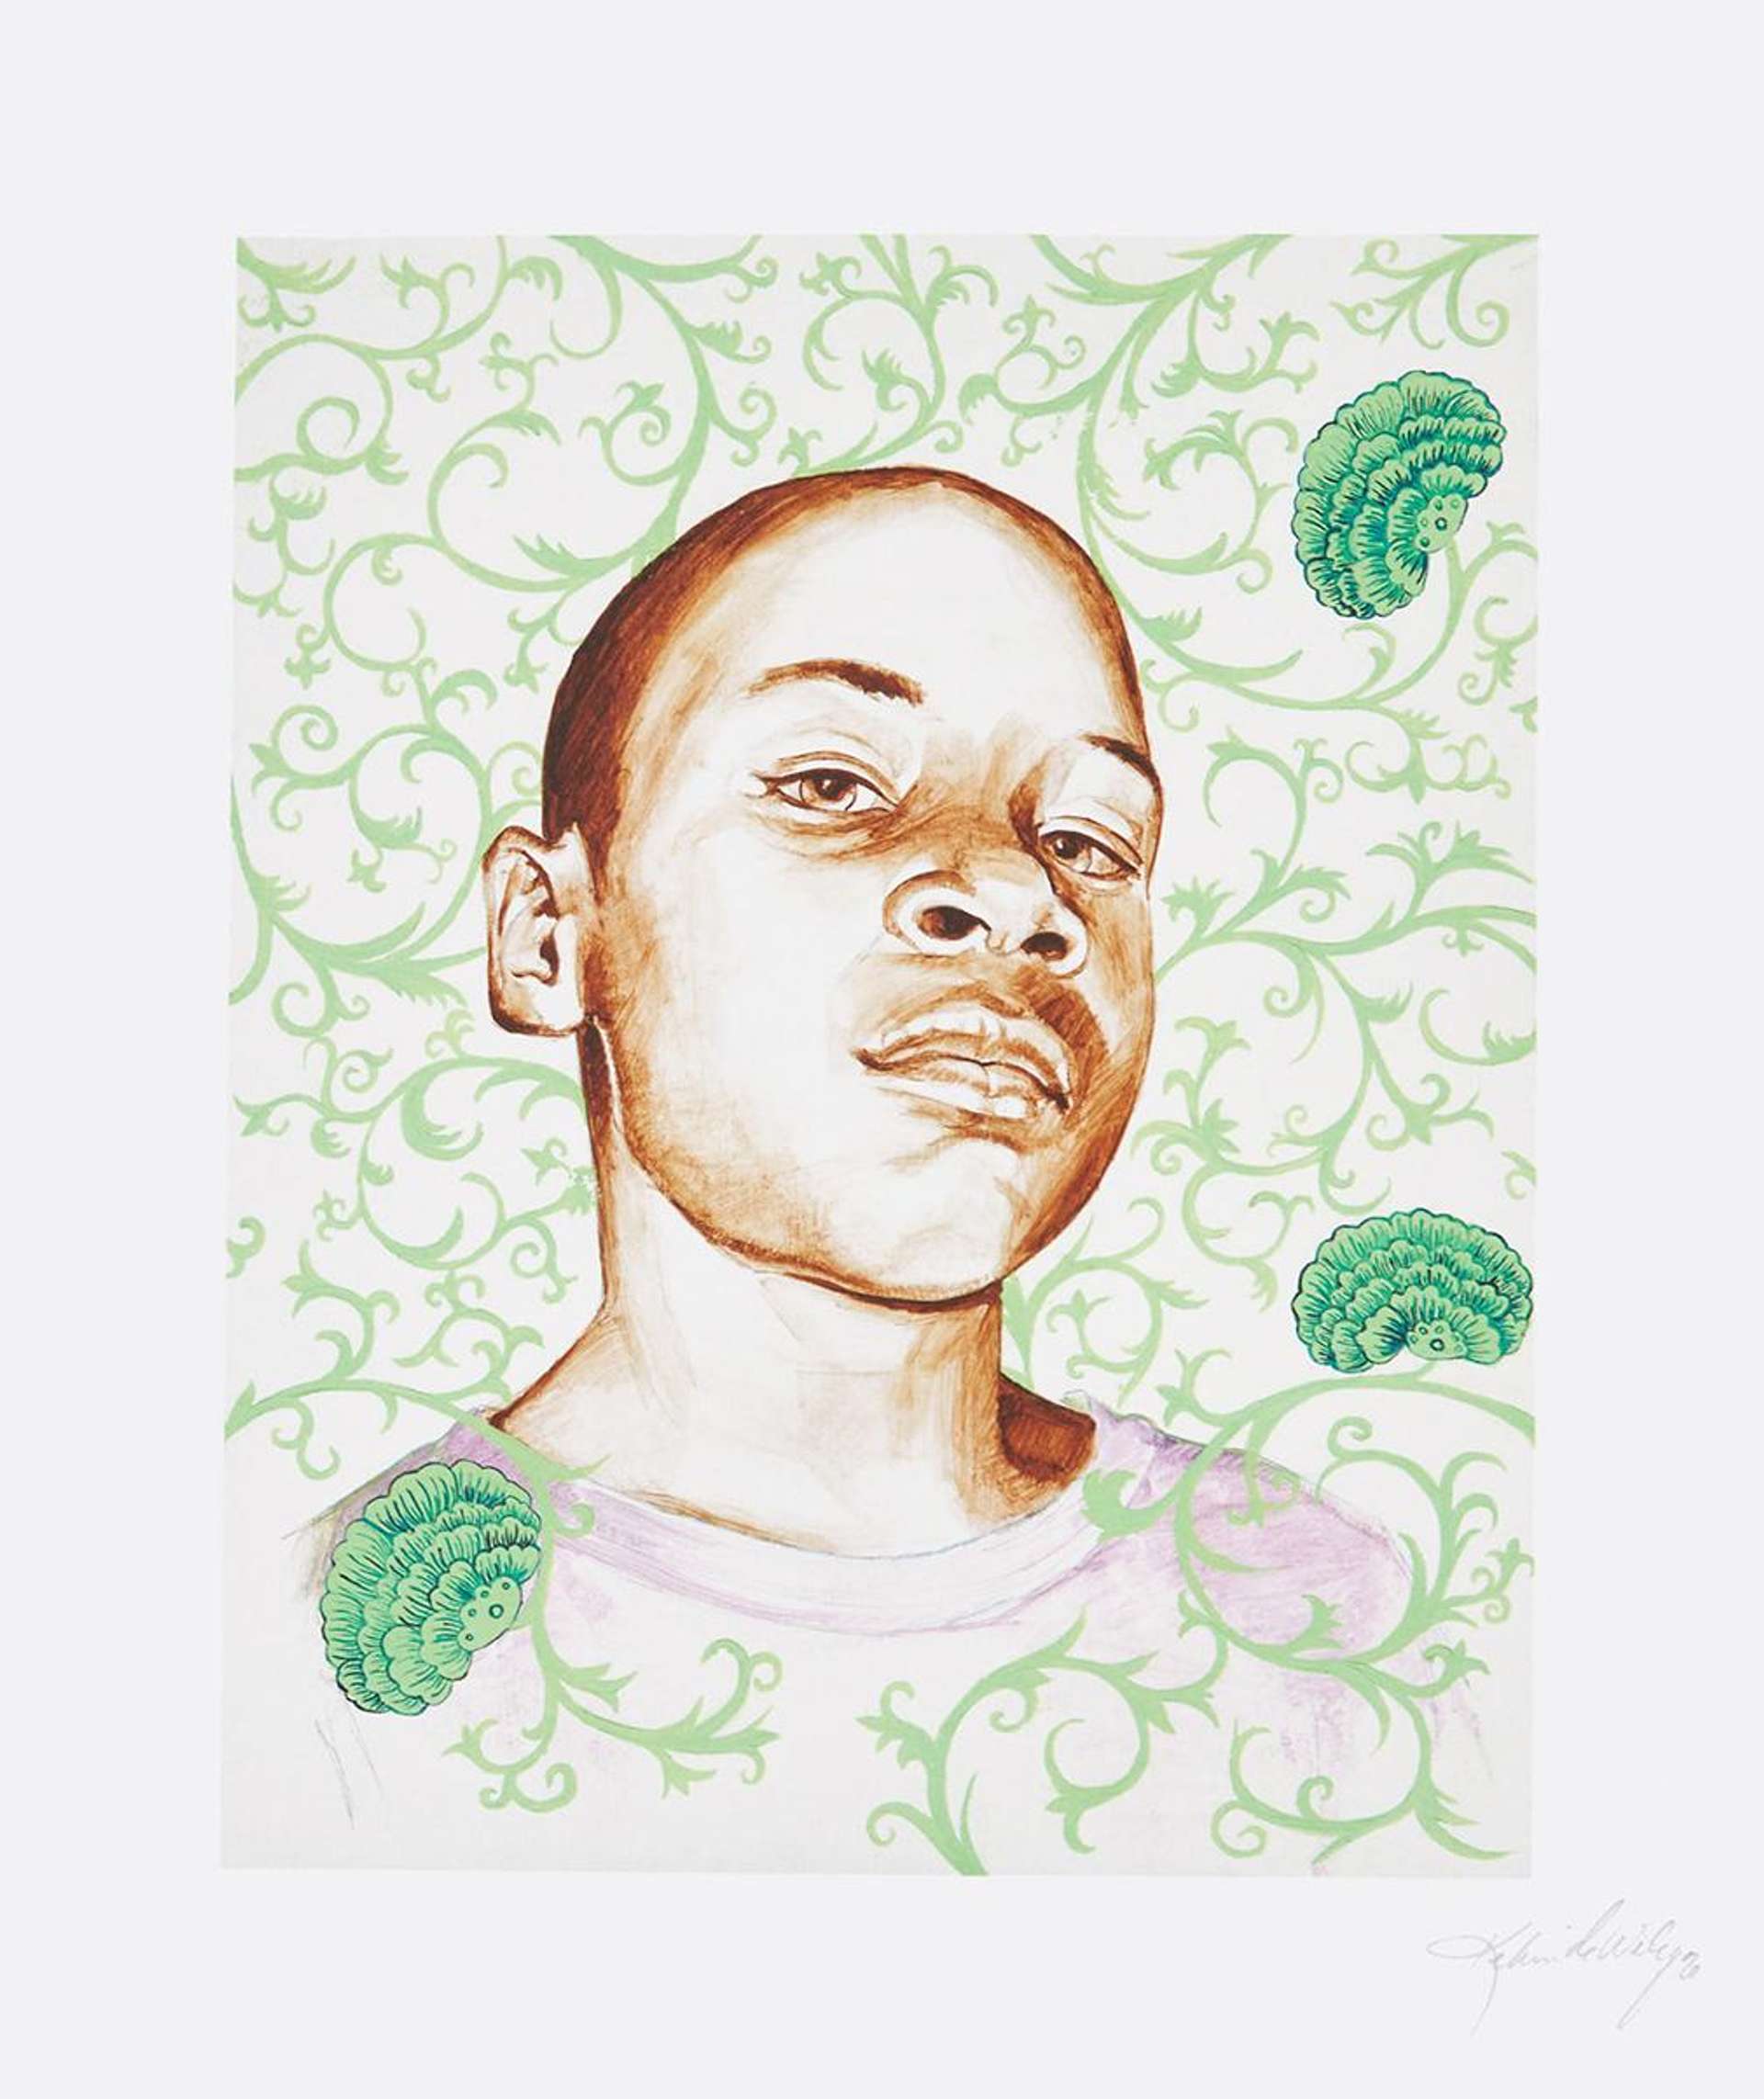 Kehinde Wiley’s Kid Ike. A pigment print of a male dressed in a young man in a light purple shirt, surrounded by green, arabesque styled foliage.